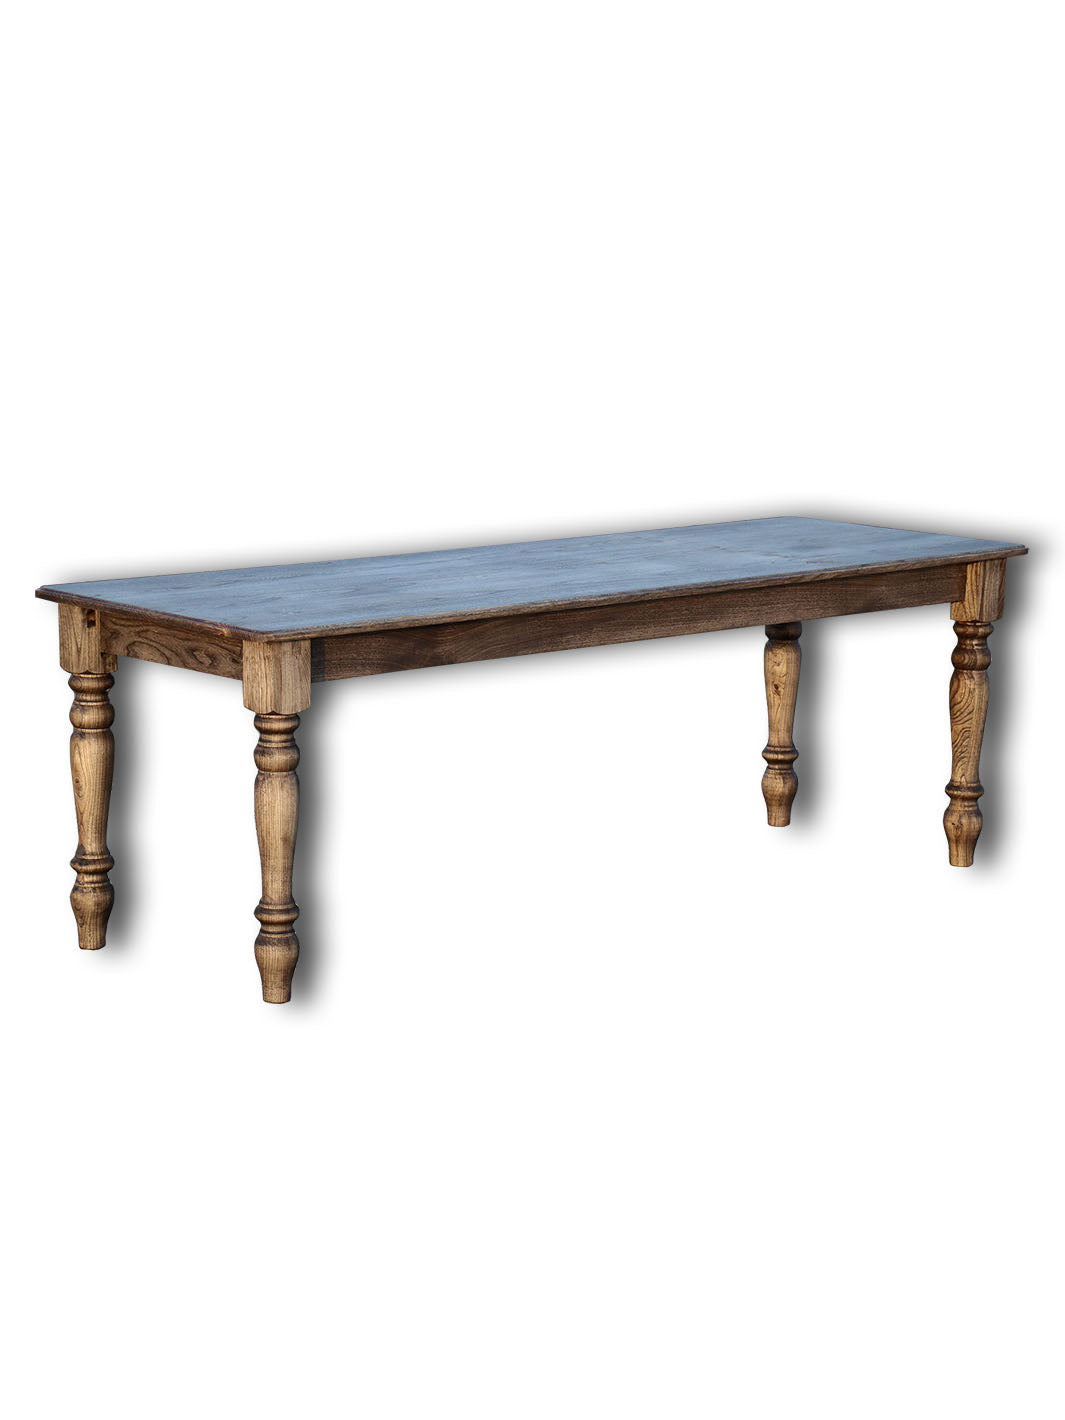 Classic Hackberry Hardwood Farmhouse Dining Table Earthly Comfort Dining Tables 1598